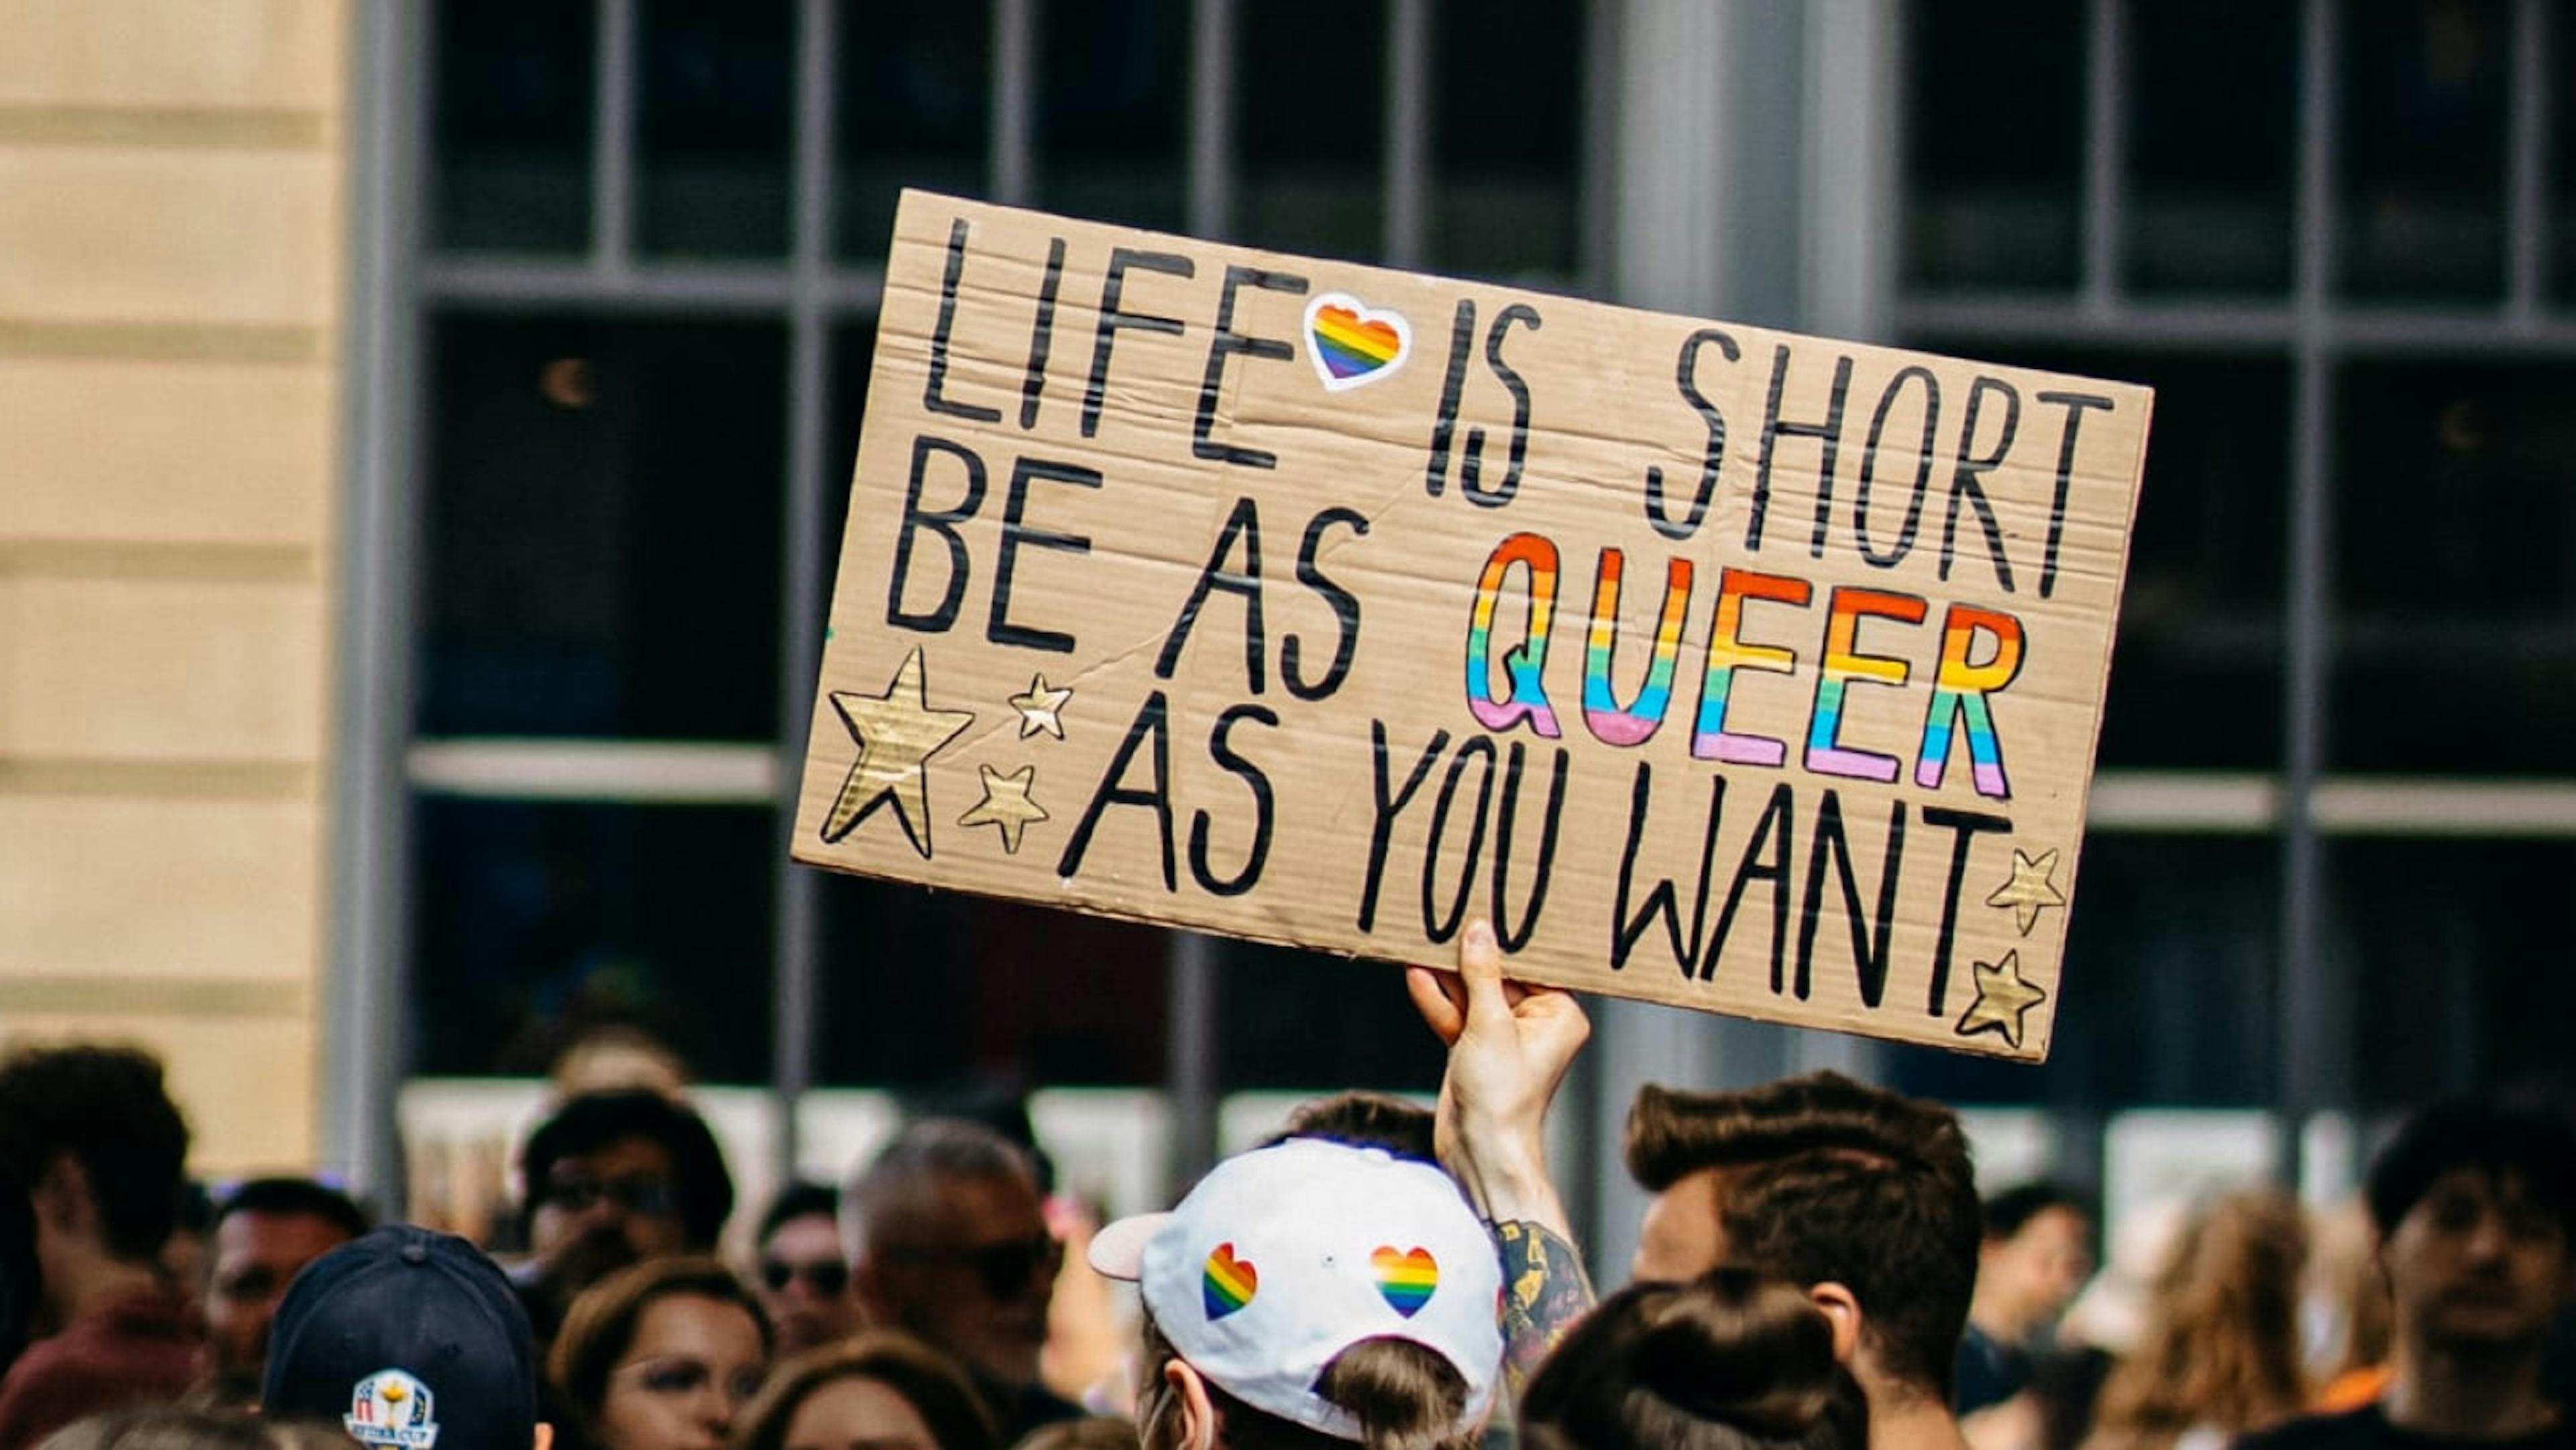 A sign at a LGBTQ+ Pride parade that reads "Life is short, be as queer as you want."